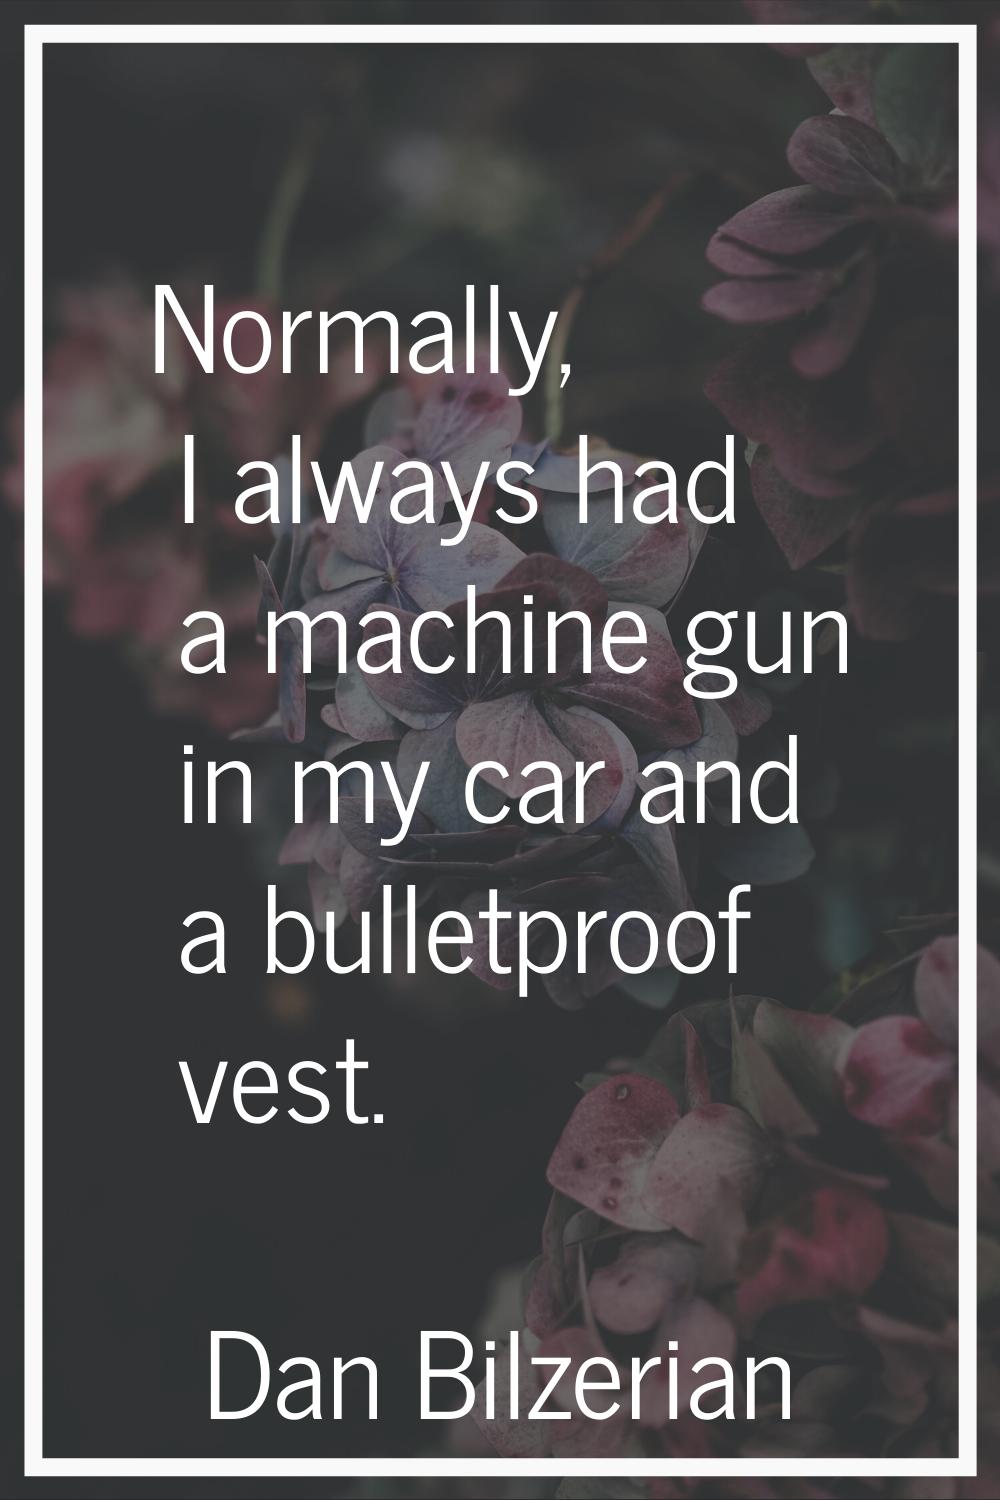 Normally, I always had a machine gun in my car and a bulletproof vest.